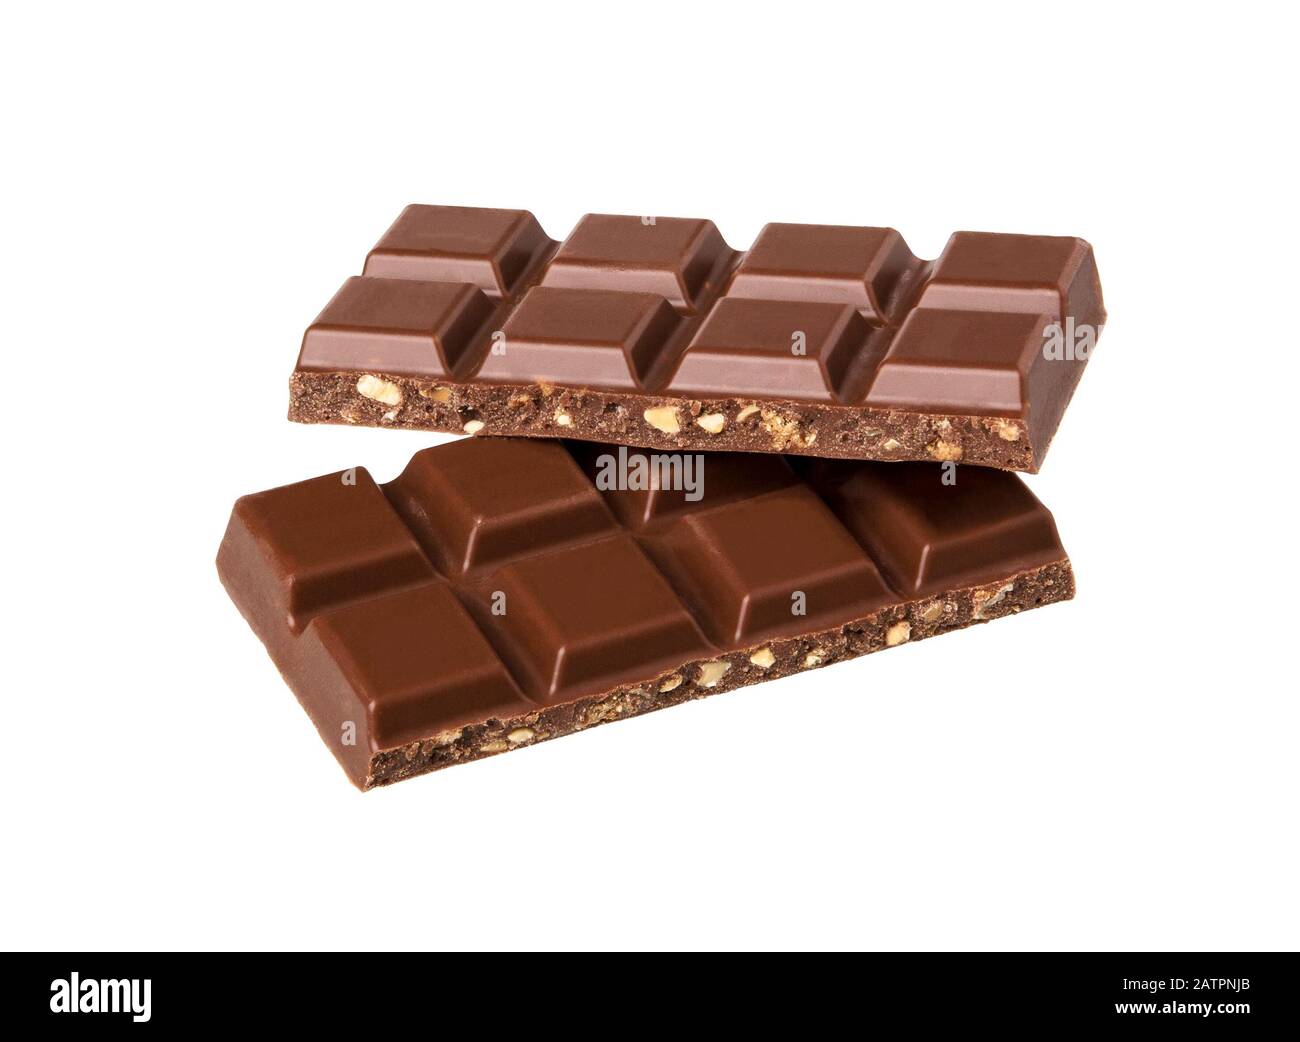 Milk chocolate pieces with nuts isolated on white background.  Chocolate bars lying on top of one another. Stock Photo